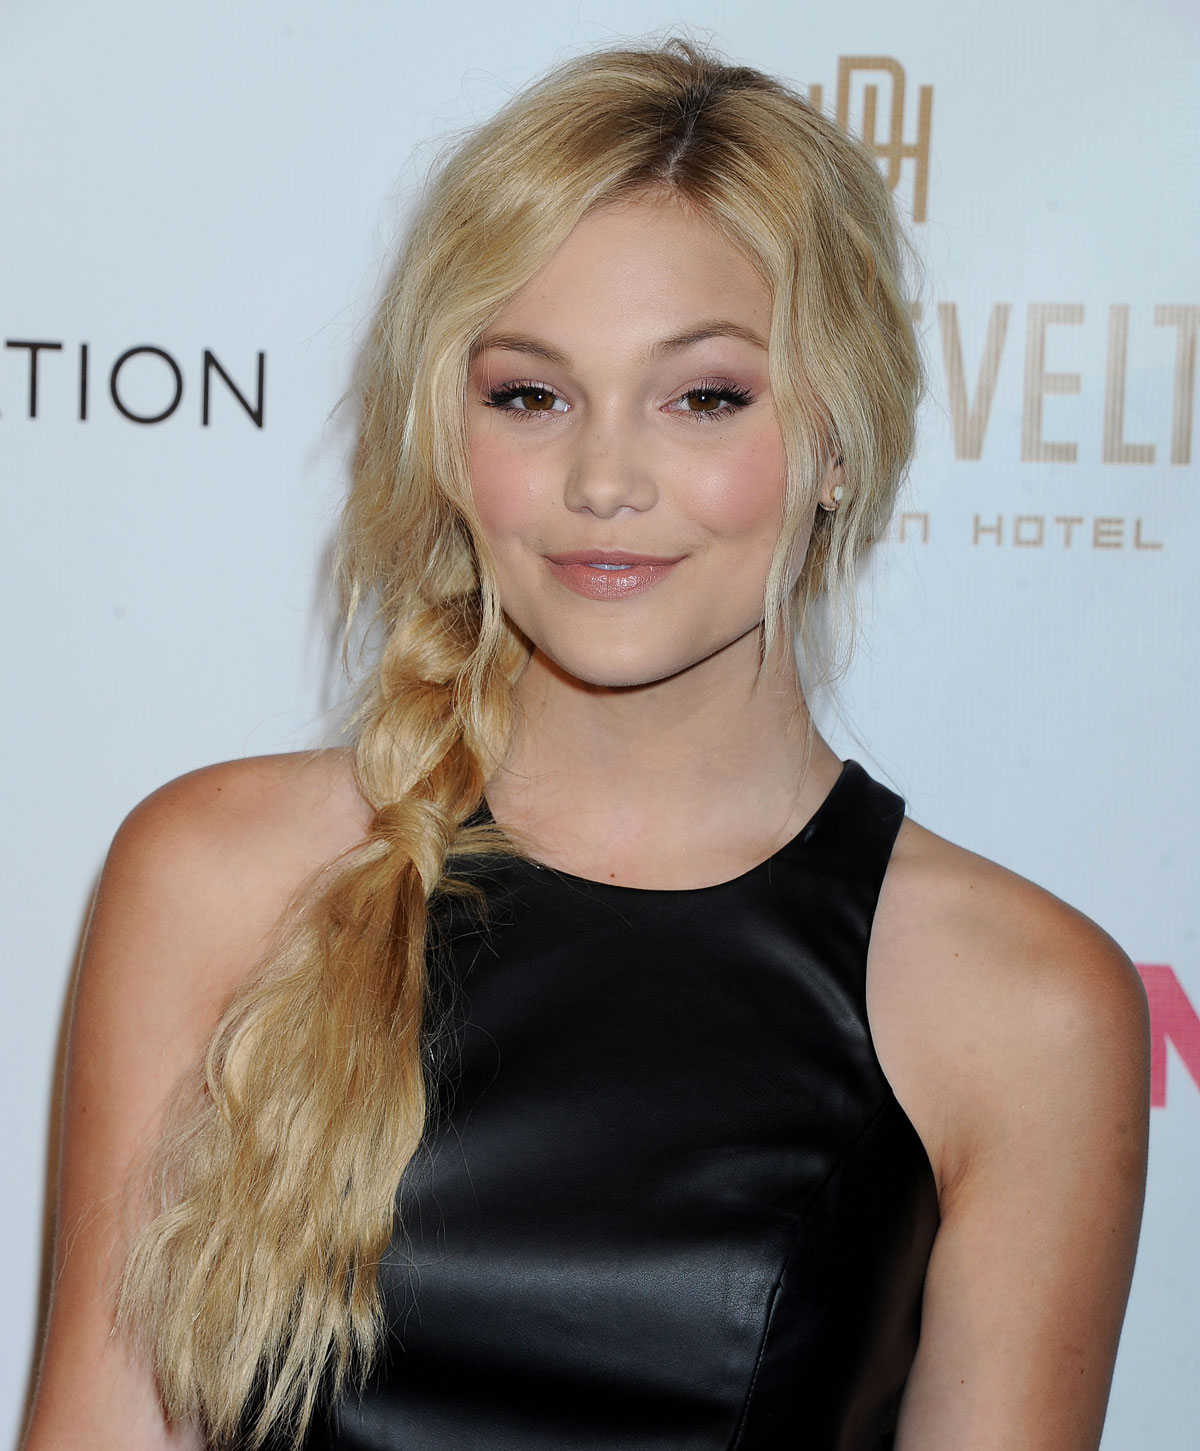 Olivia Holt attends the Nylon magazine Young Hollywood Party